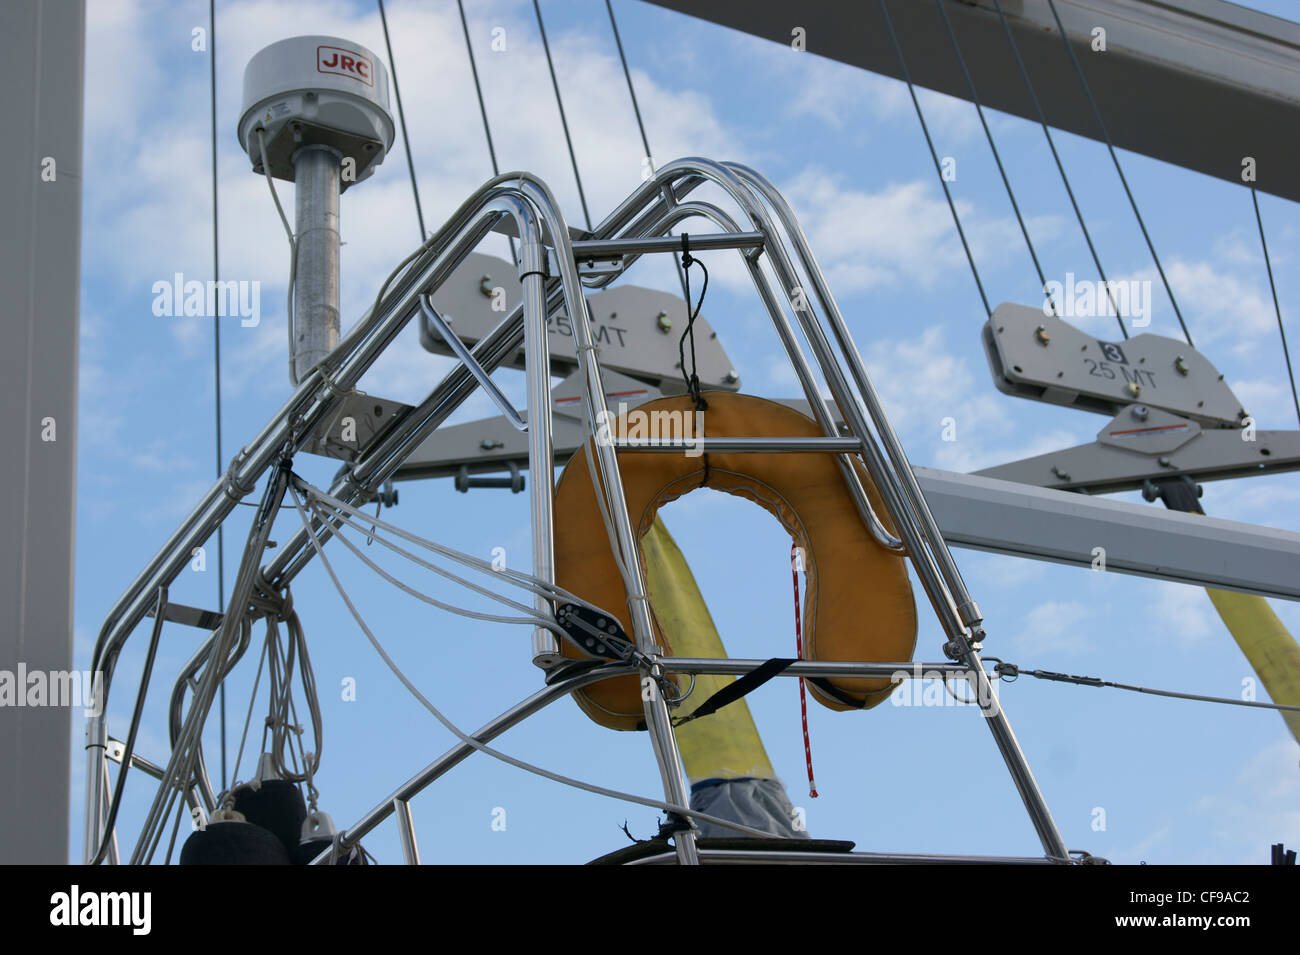 USCG approved type 5 yellow horseshoe buoy on a sailboat with rigging and radar in the background. Stock Photo